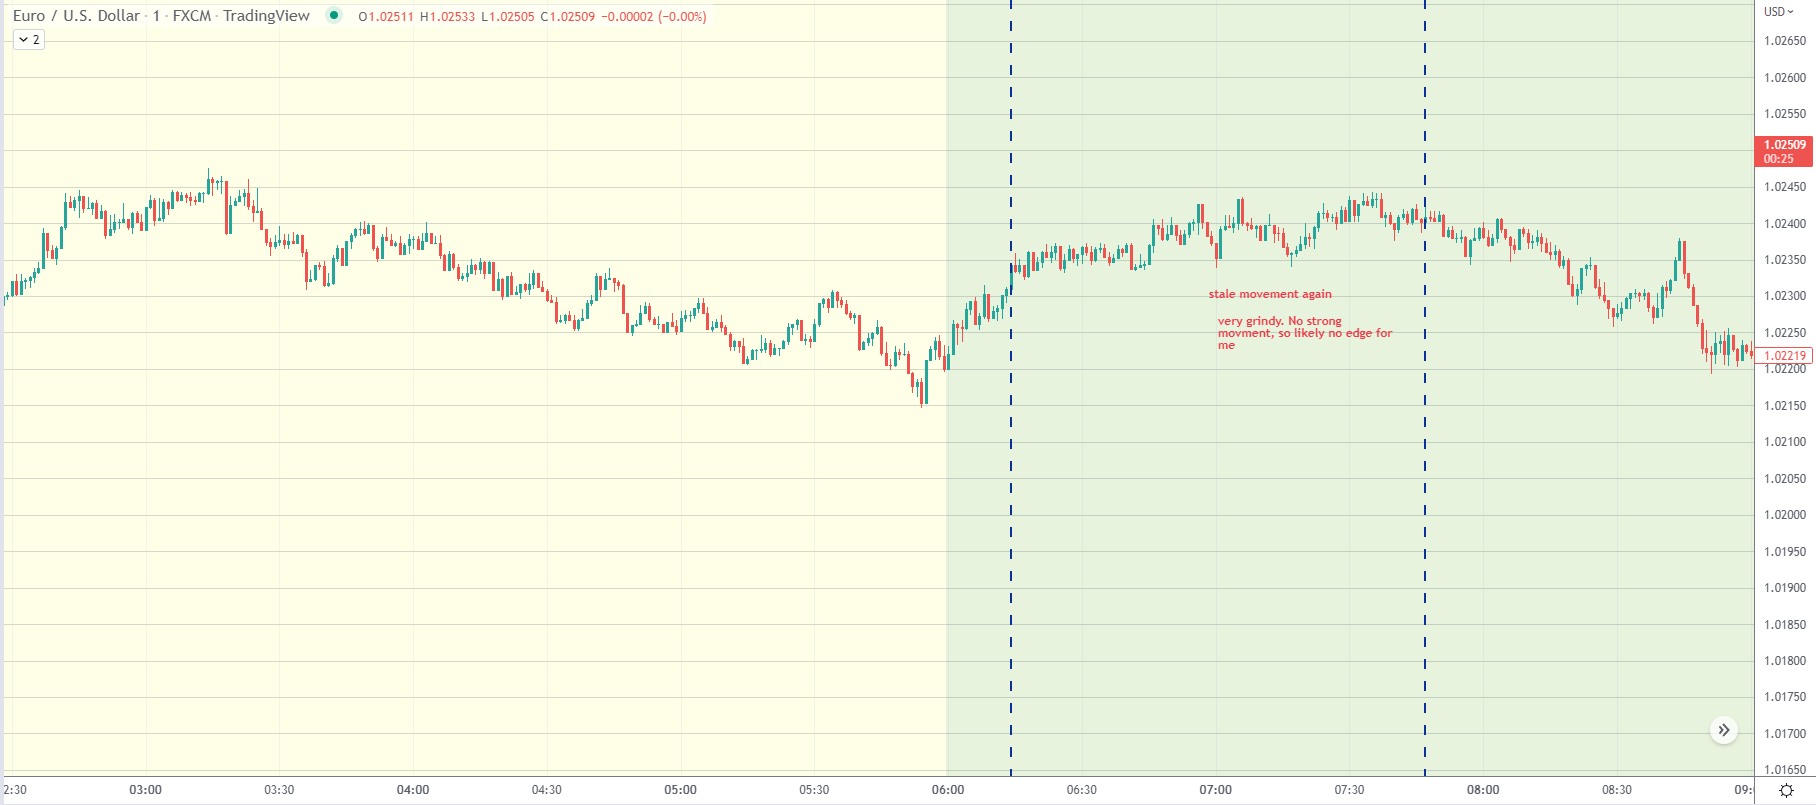 EURUSD day trading strategy examples Aug 9 2022